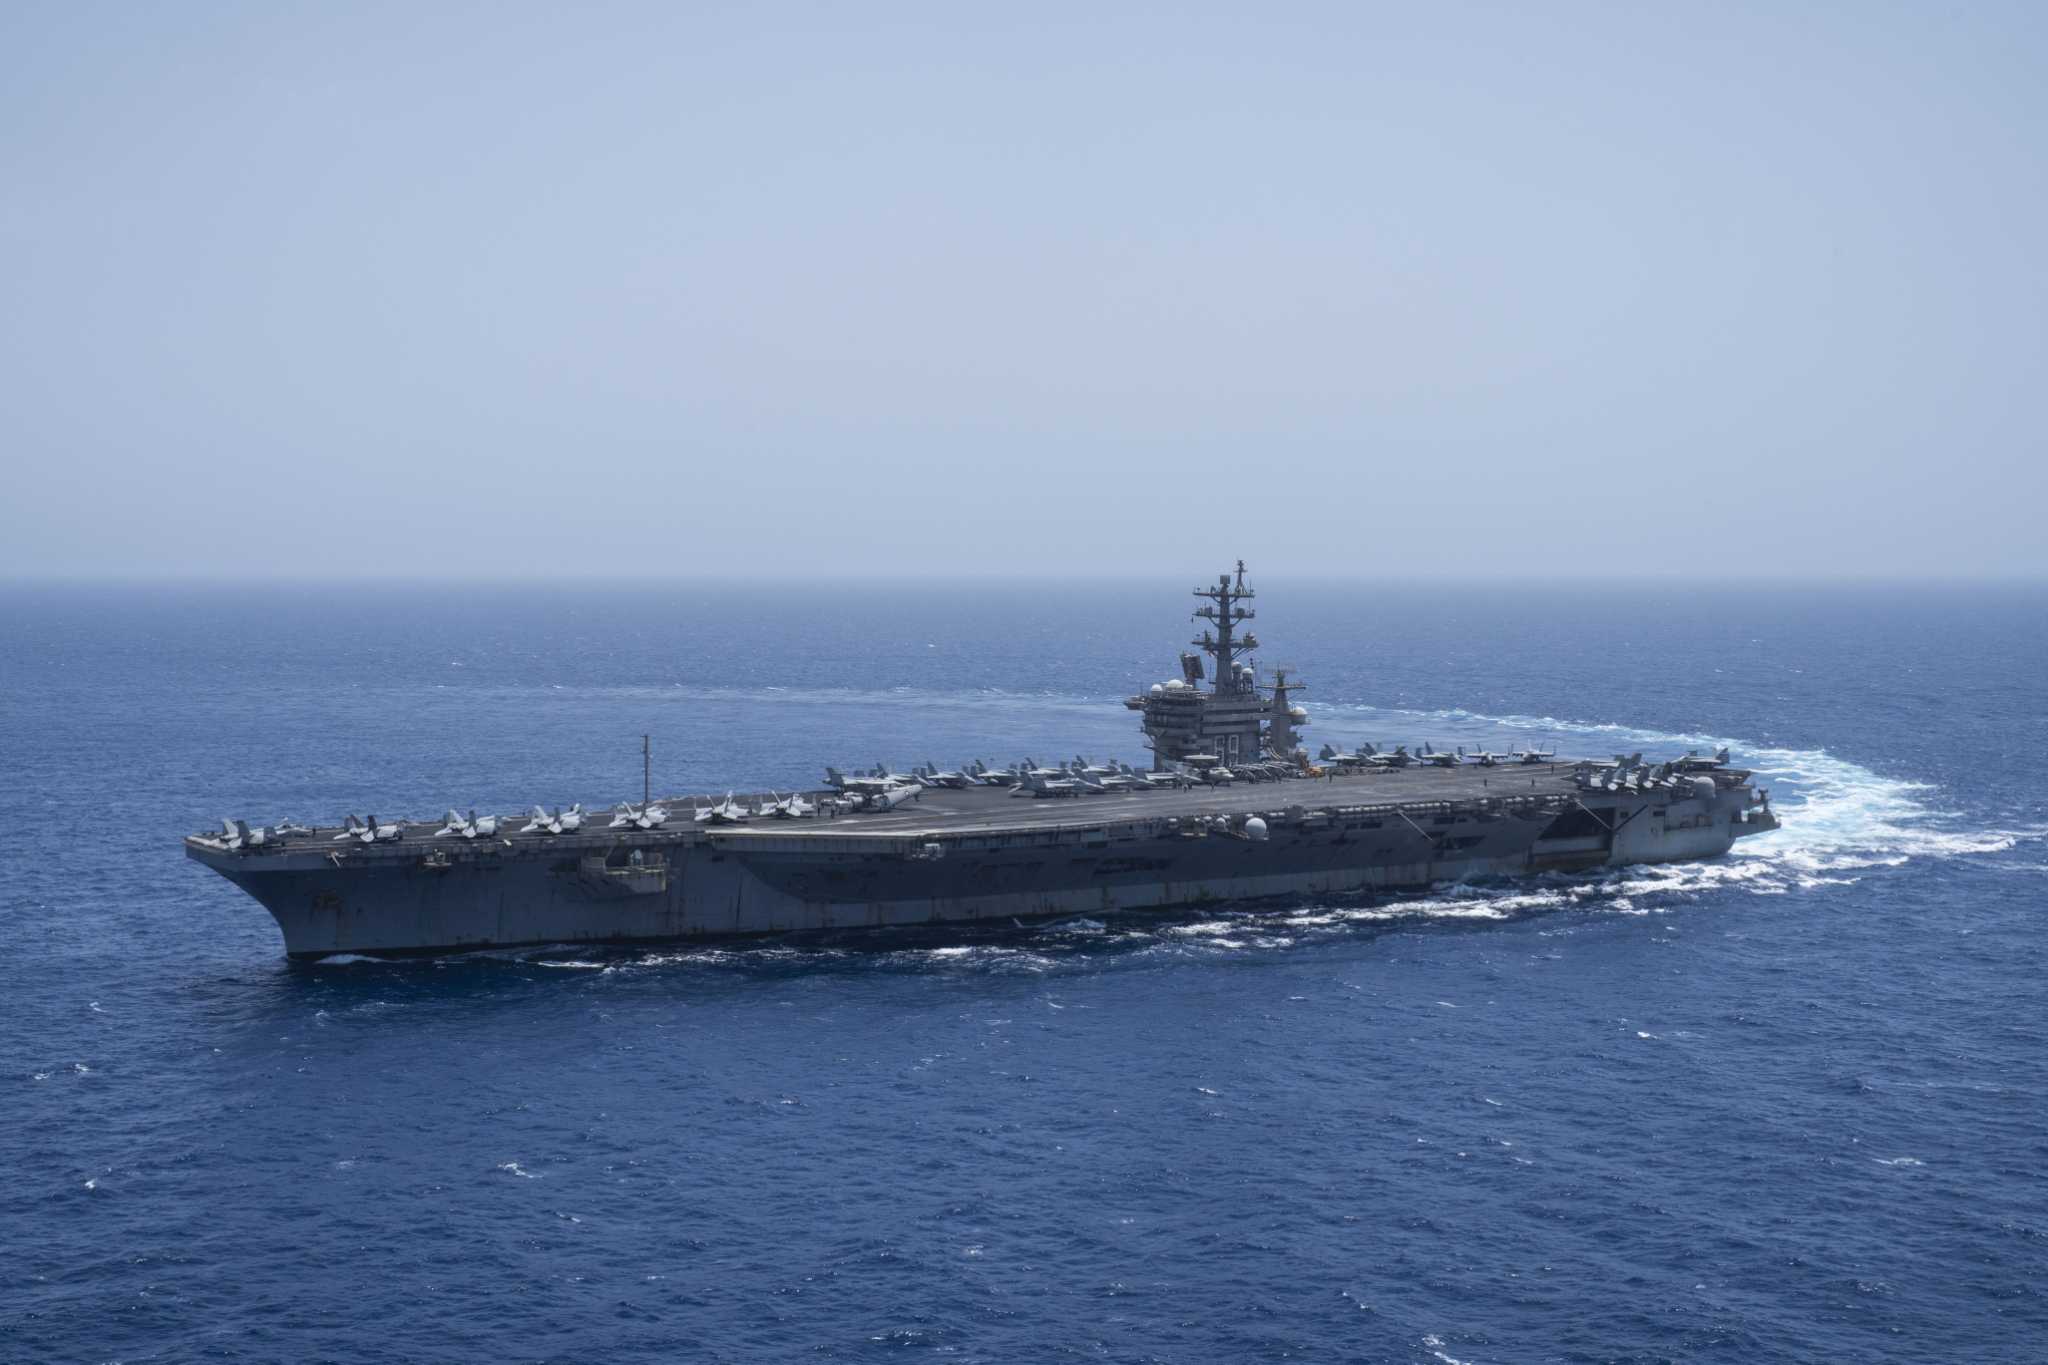 A US aircraft carrier and its crew have fought Houthi attacks for months. How long can it last?